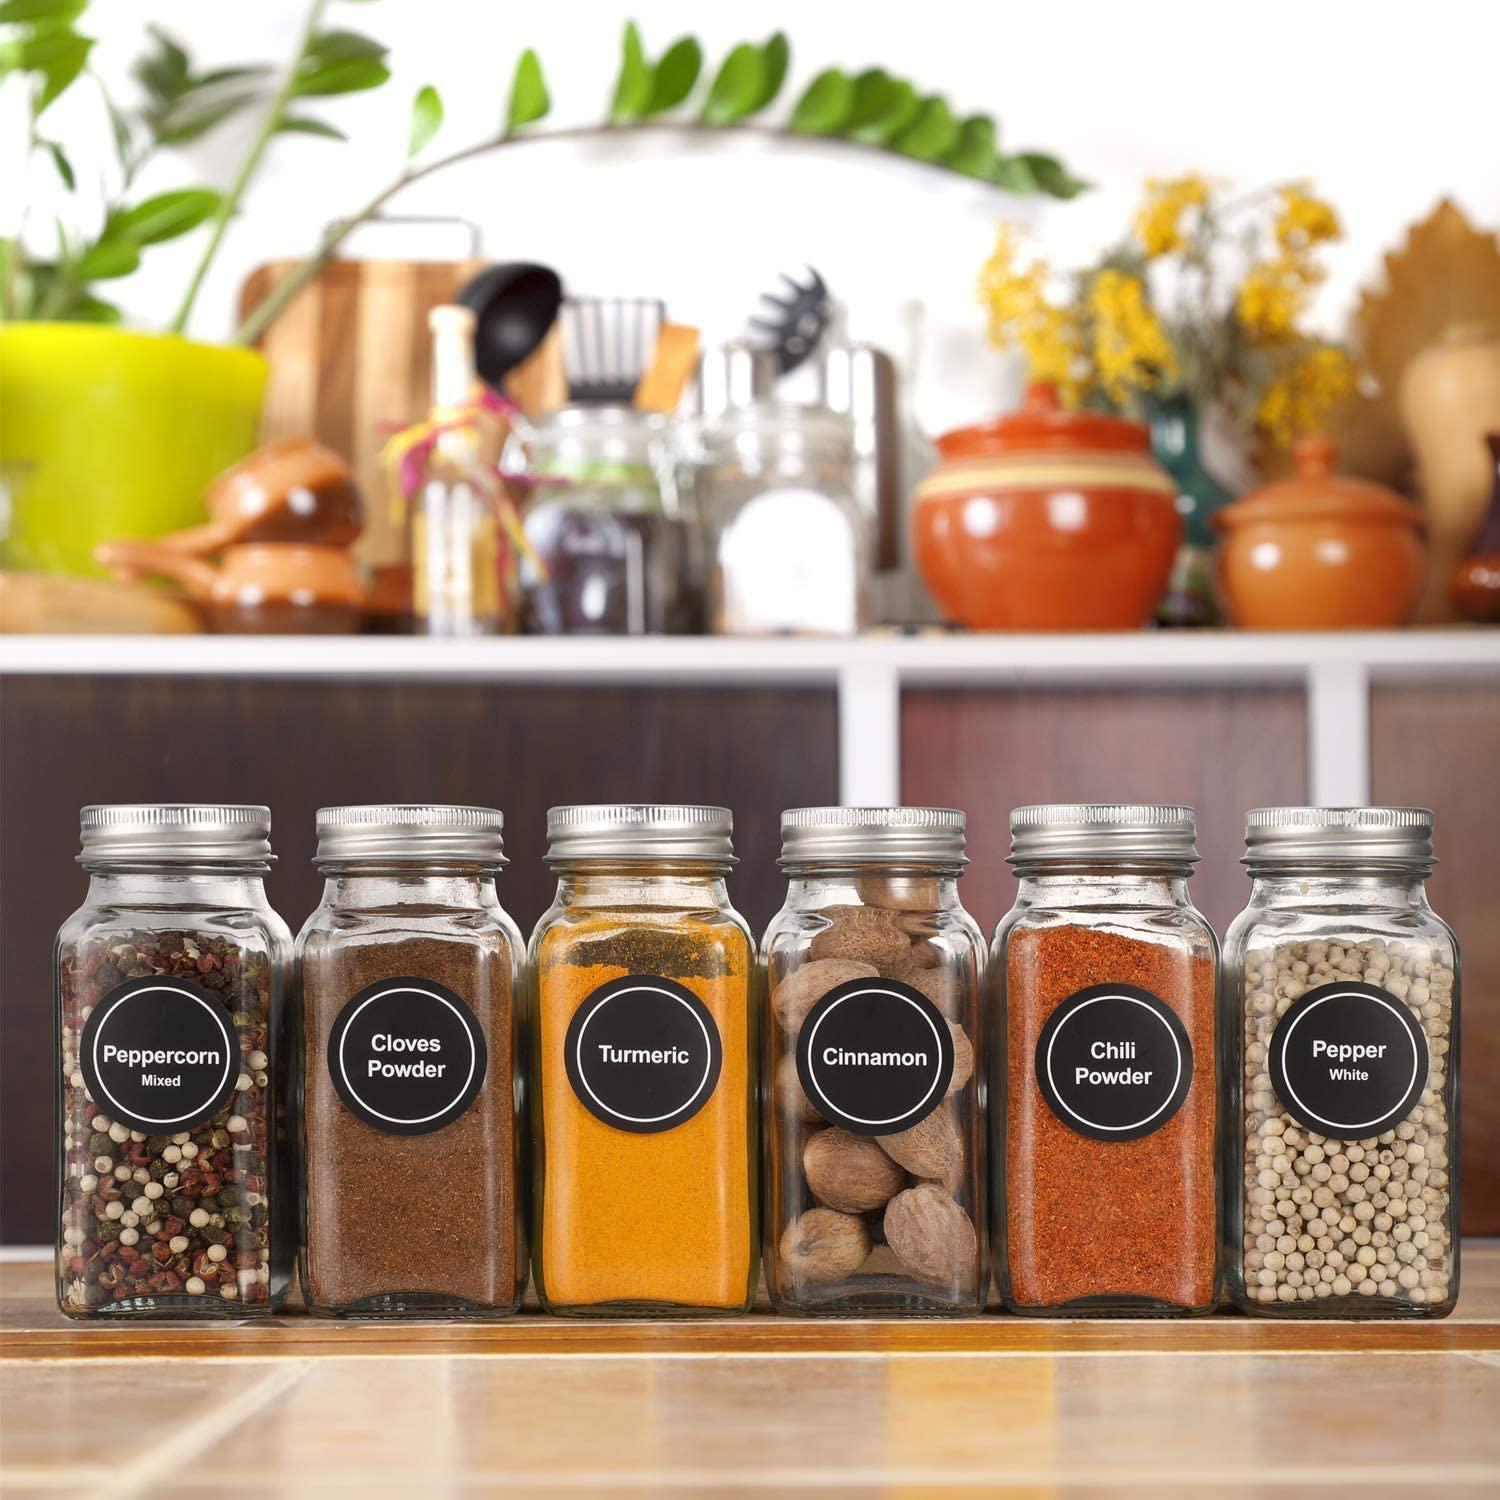 24 Spice Jars with 547 Labels - Glass Spice Jars with Shaker Lids